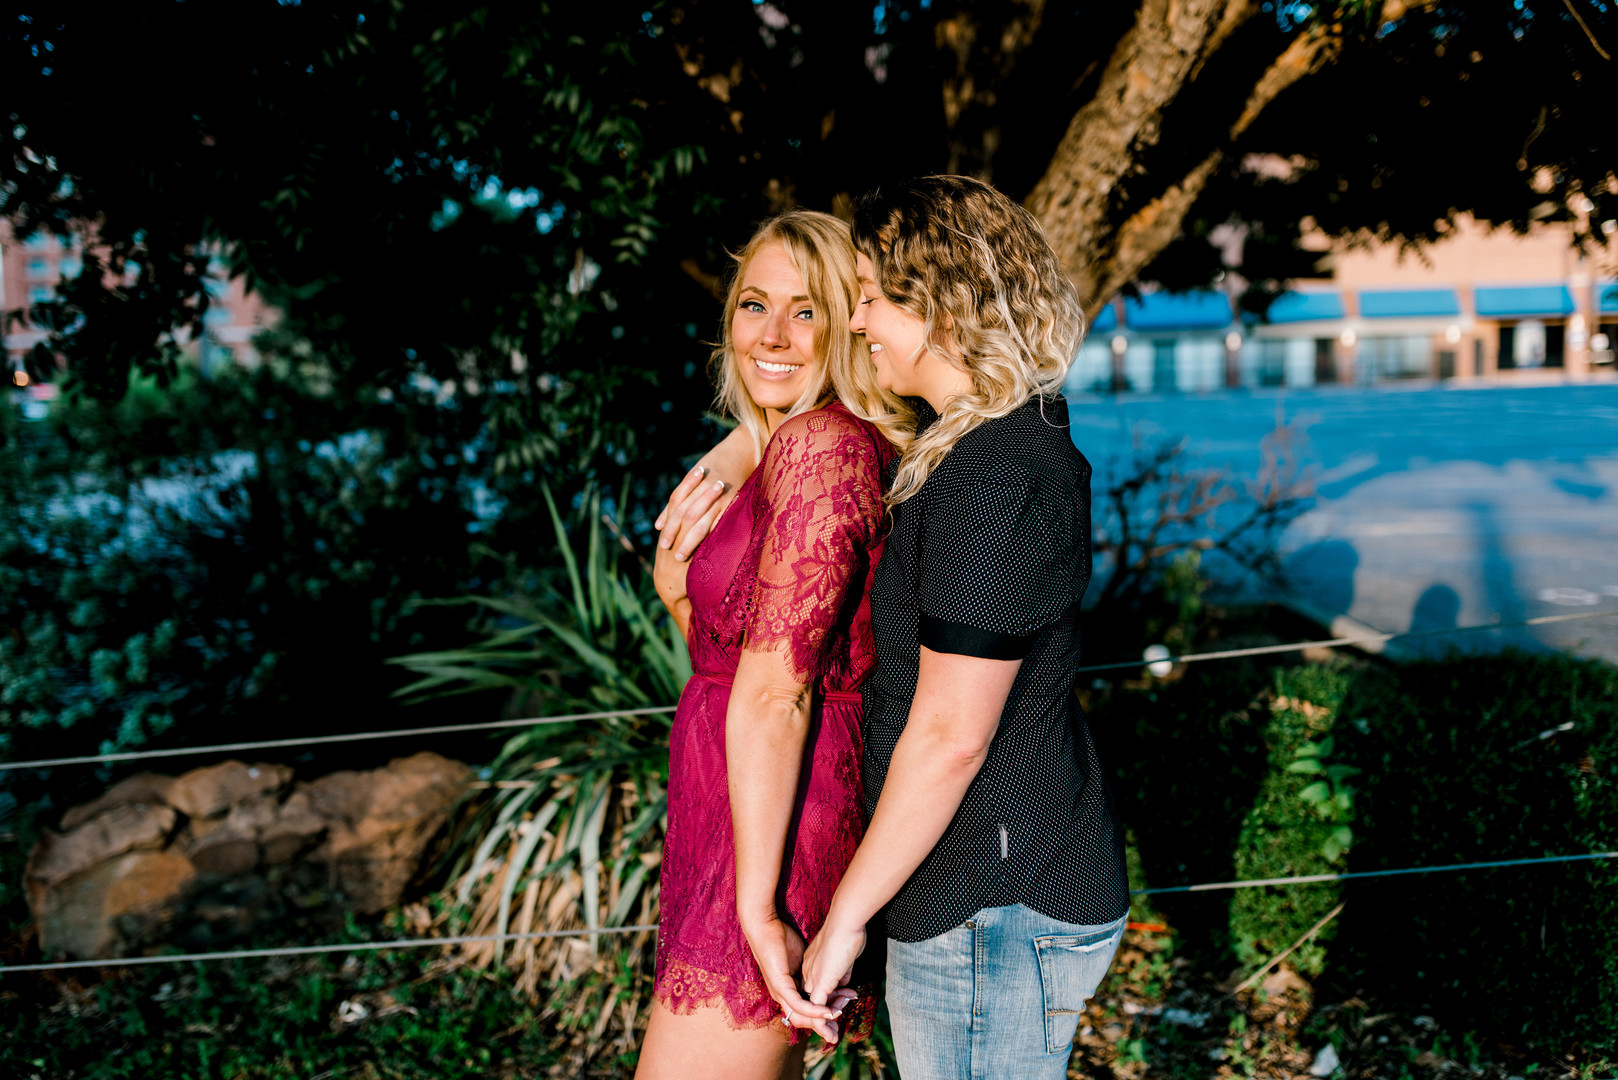 Bright, floral engagement session in downtown Dallas, Texas two blonde brides ring casual sunrise jeans red lace dress heels boots early morning